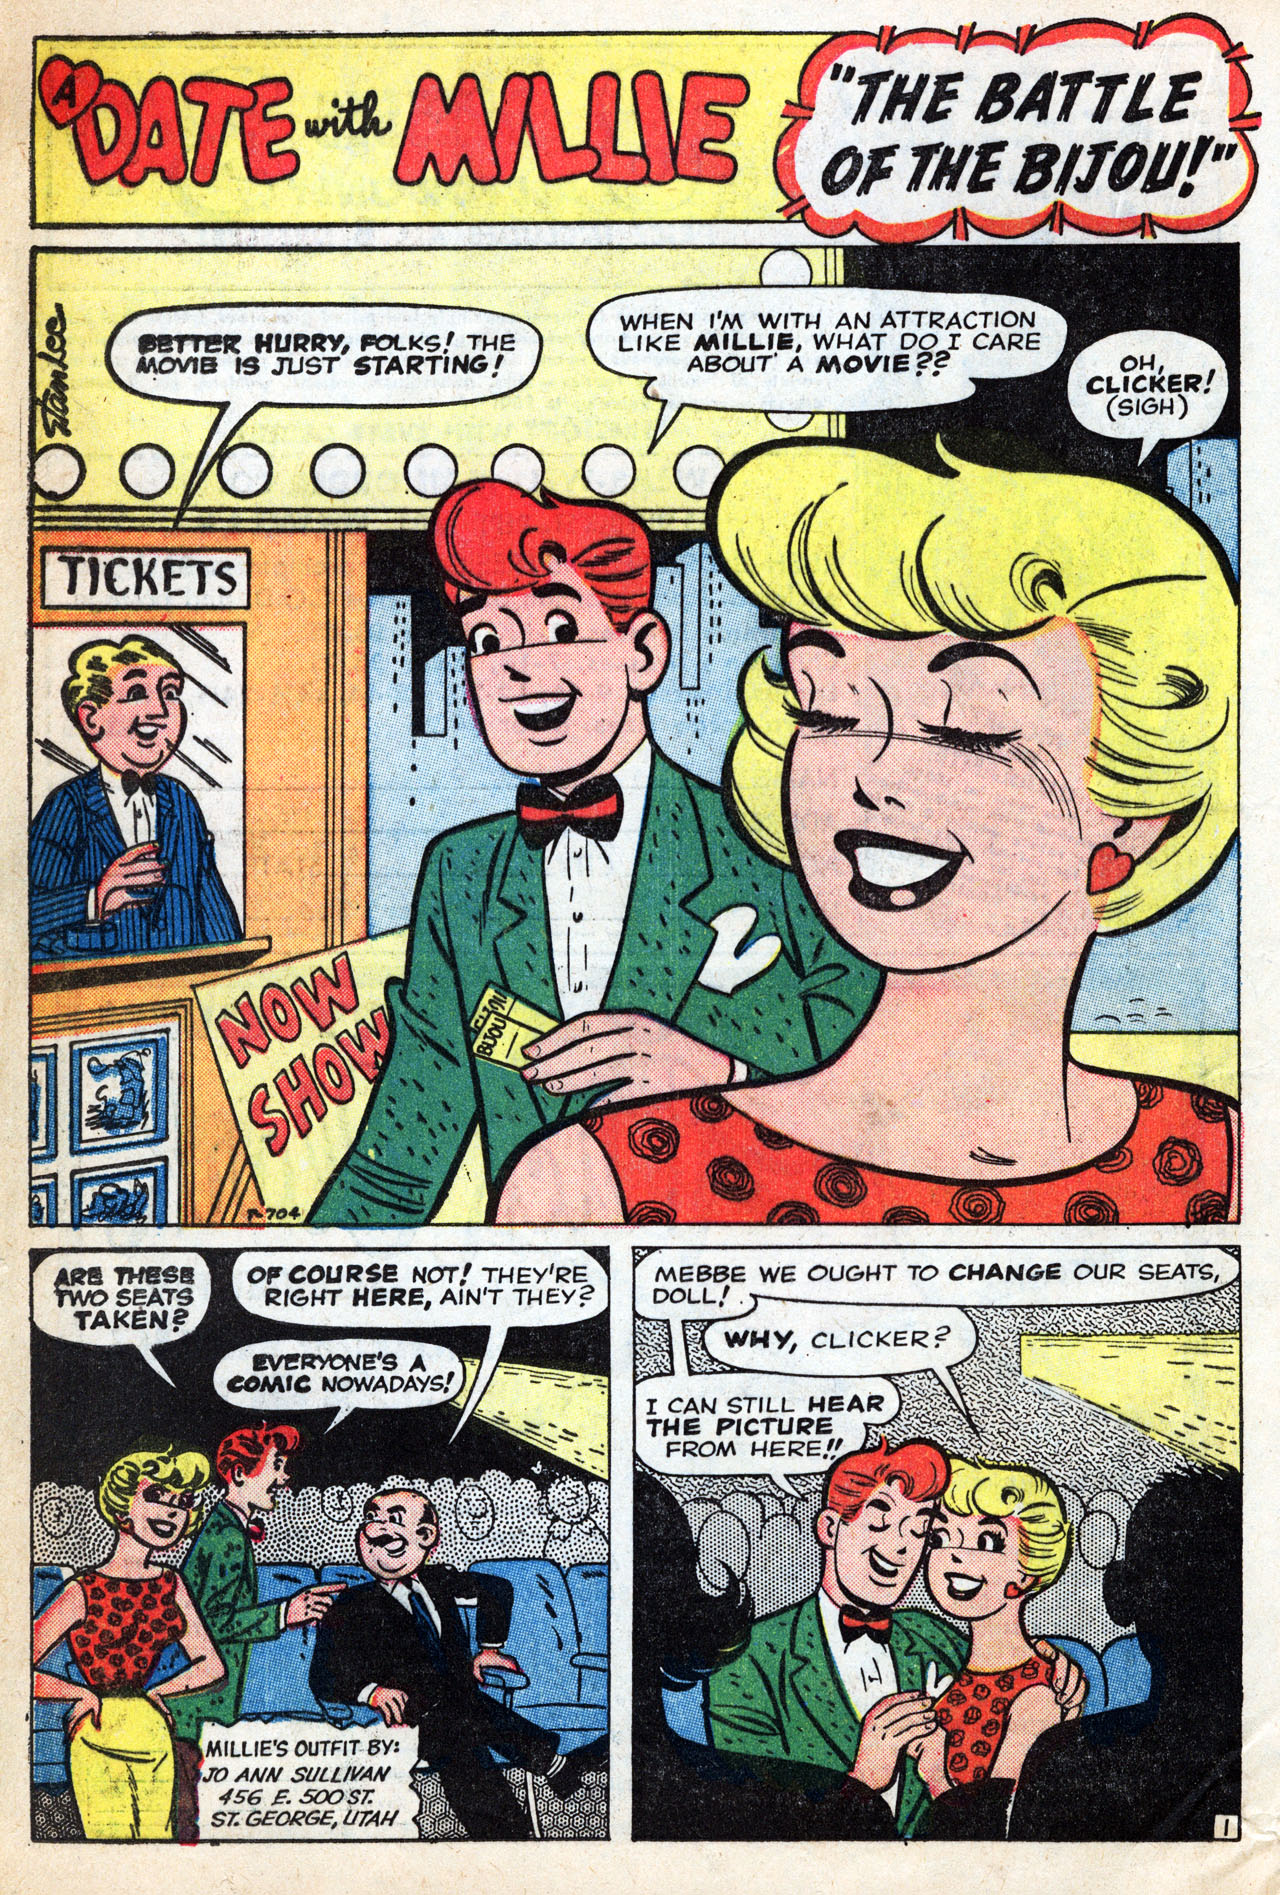 Read online A Date with Millie (1959) comic -  Issue #4 - 20